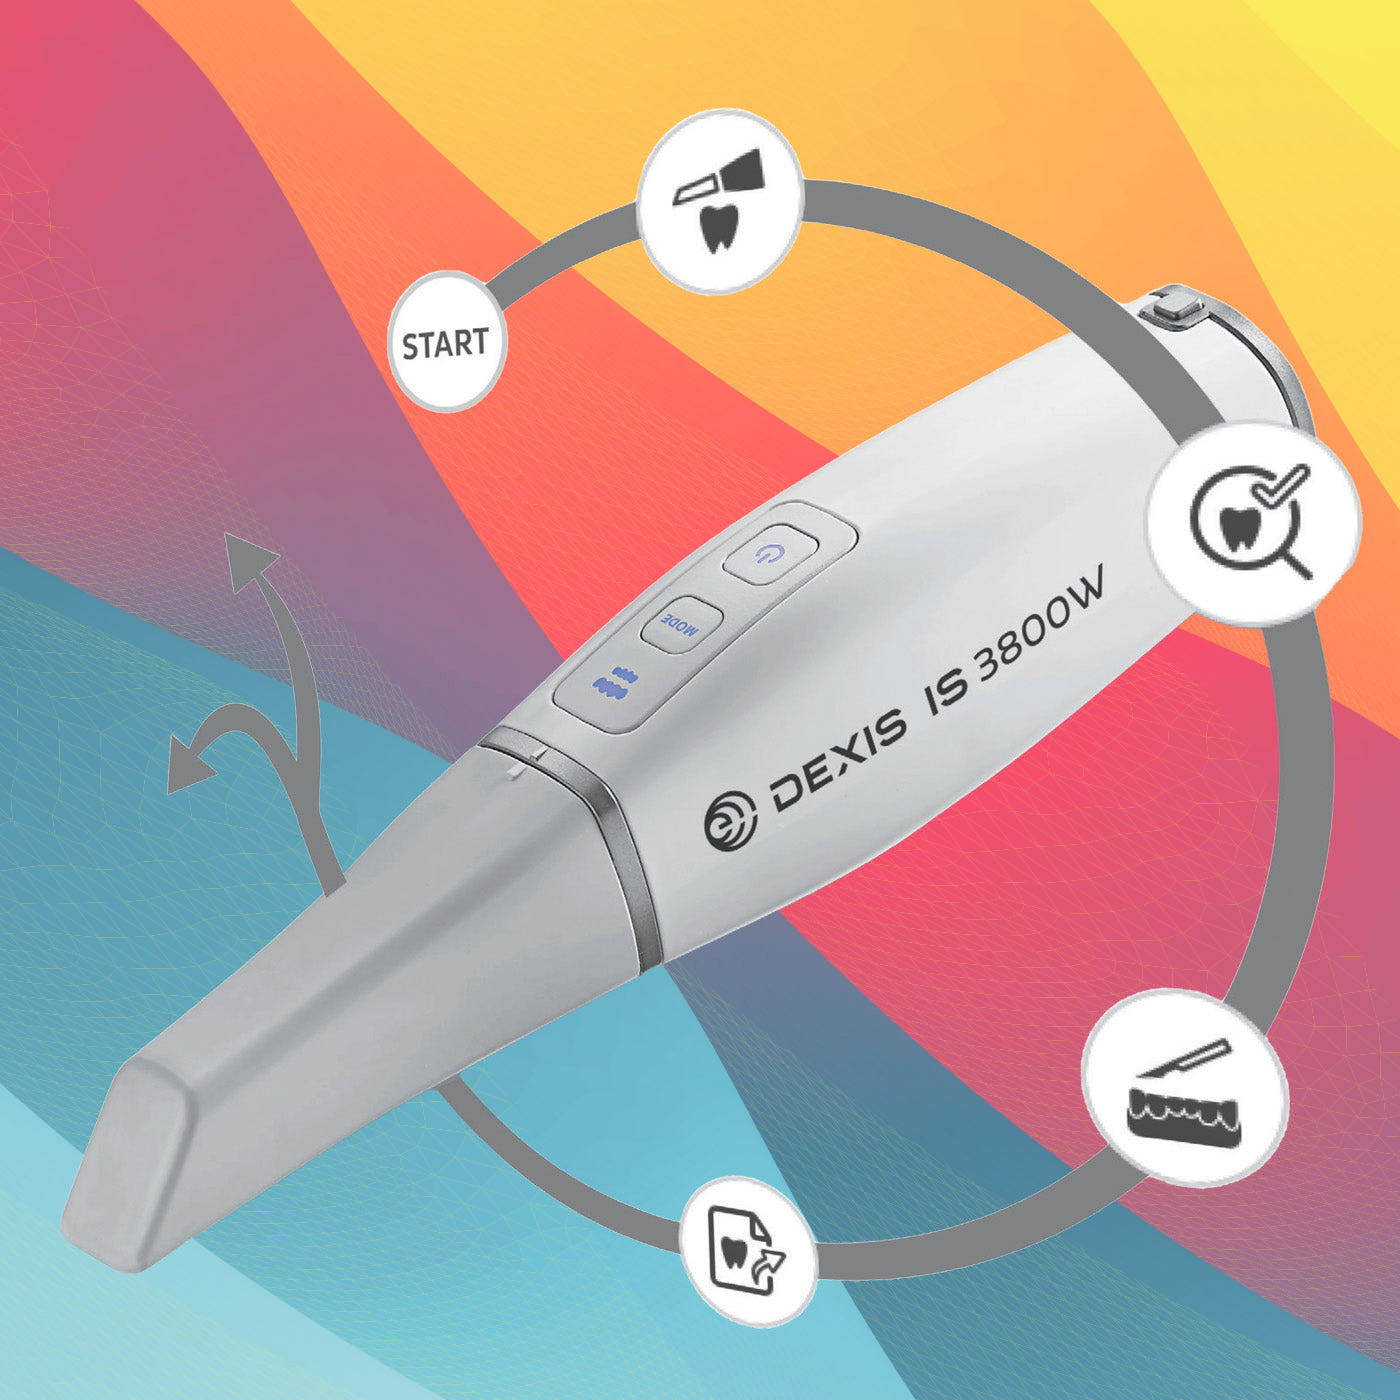 
                  
                    DEXIS™ IS 3800W Wireless Intra Oral Scanner.
                  
                